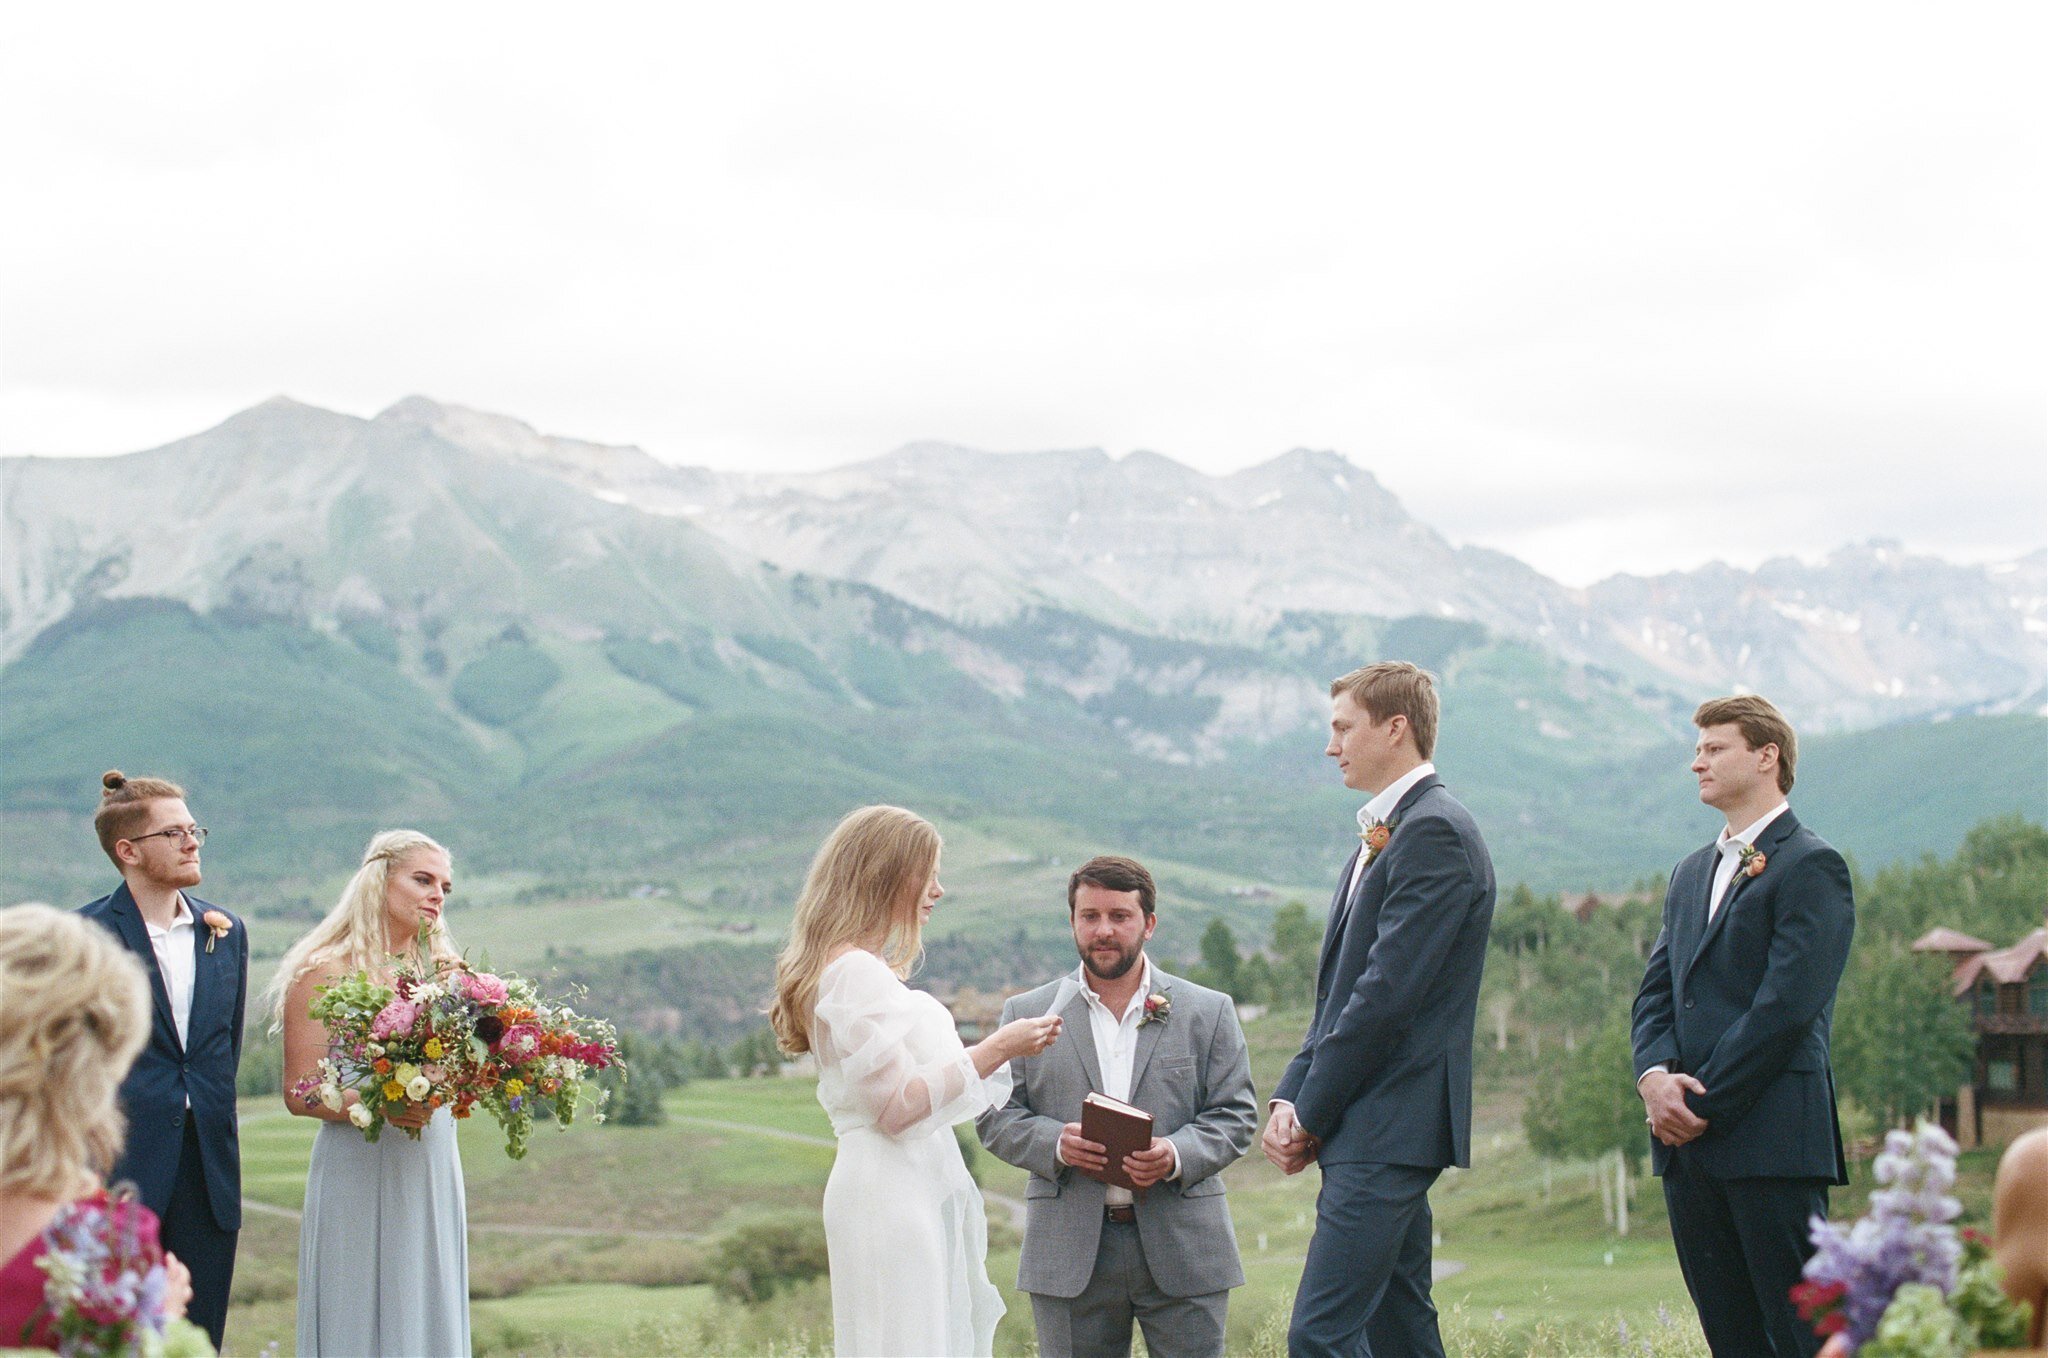  a bride and groom exchanging vows during their outdoor wedding in the mountains in Telluride, Colorado 